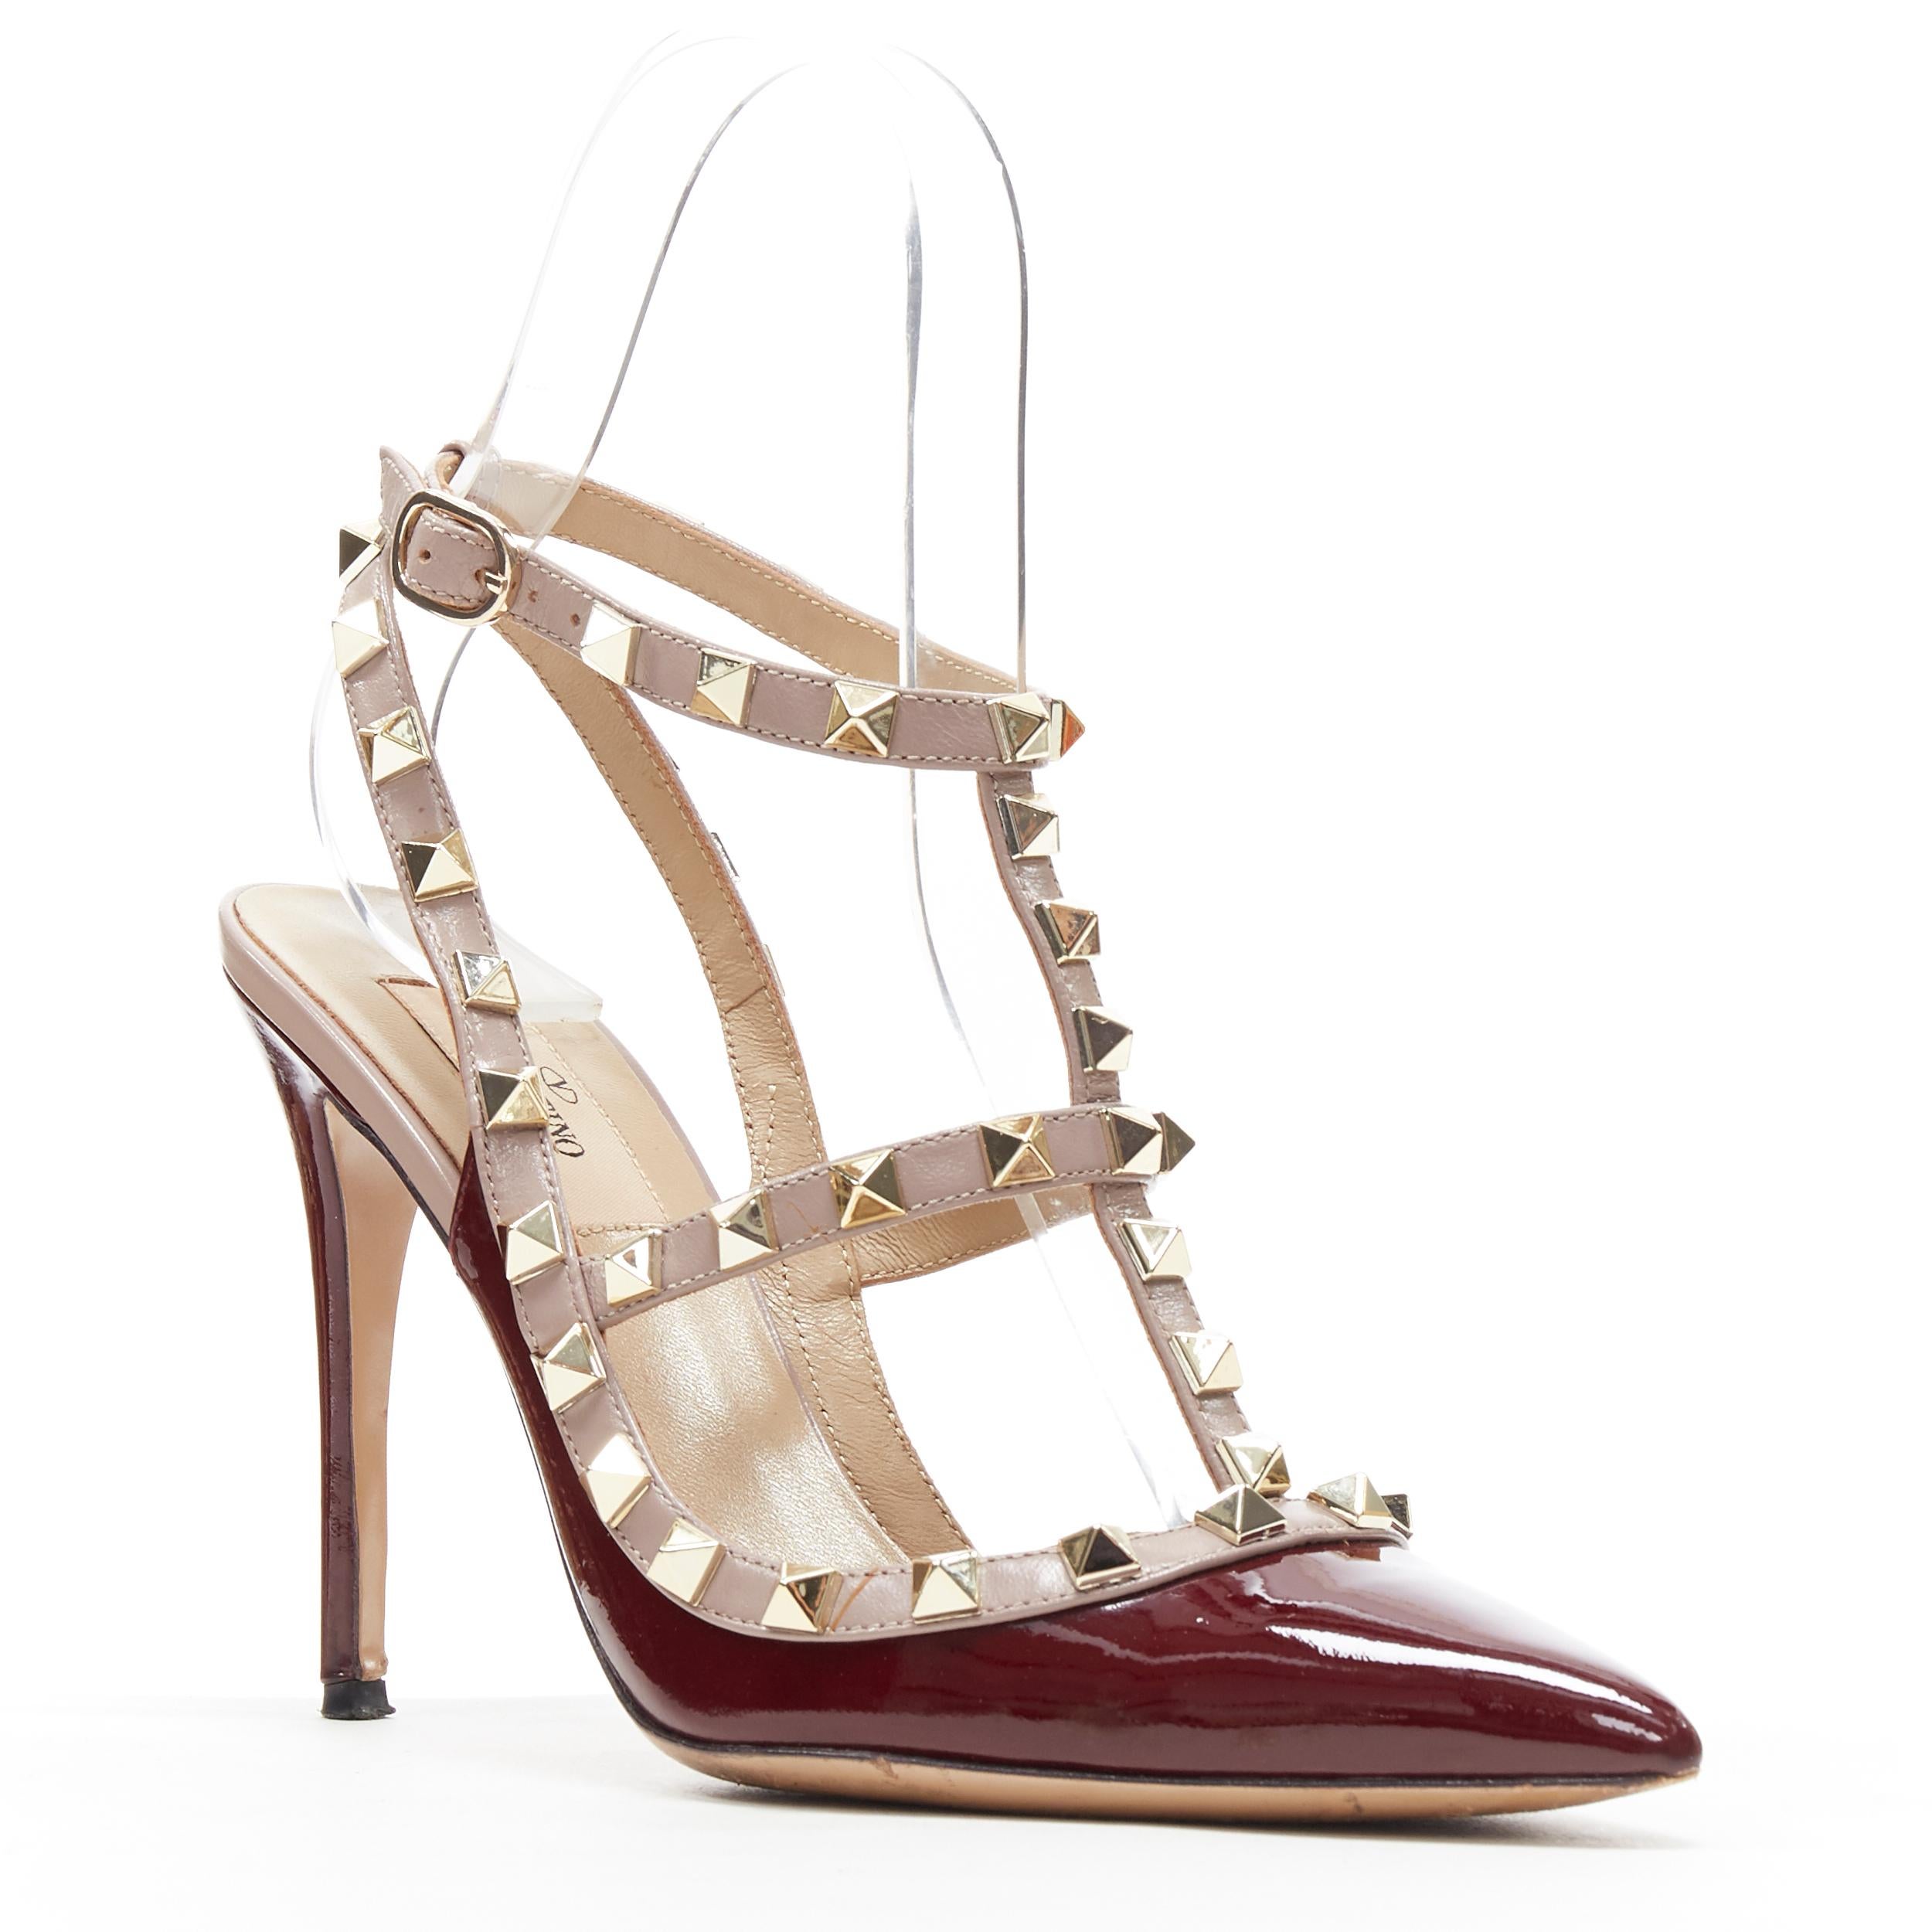 VALENTINO Rockstud burgundy red patent gold studded caged point toe heel EU39
Brand: Valentino
Model Name / Style: Rockstud pump
Material: Patent leather
Color: Burgundy
Pattern: Solid
Closure: Ankle strap
Extra Detail: High (3-3.9 in) heel height.